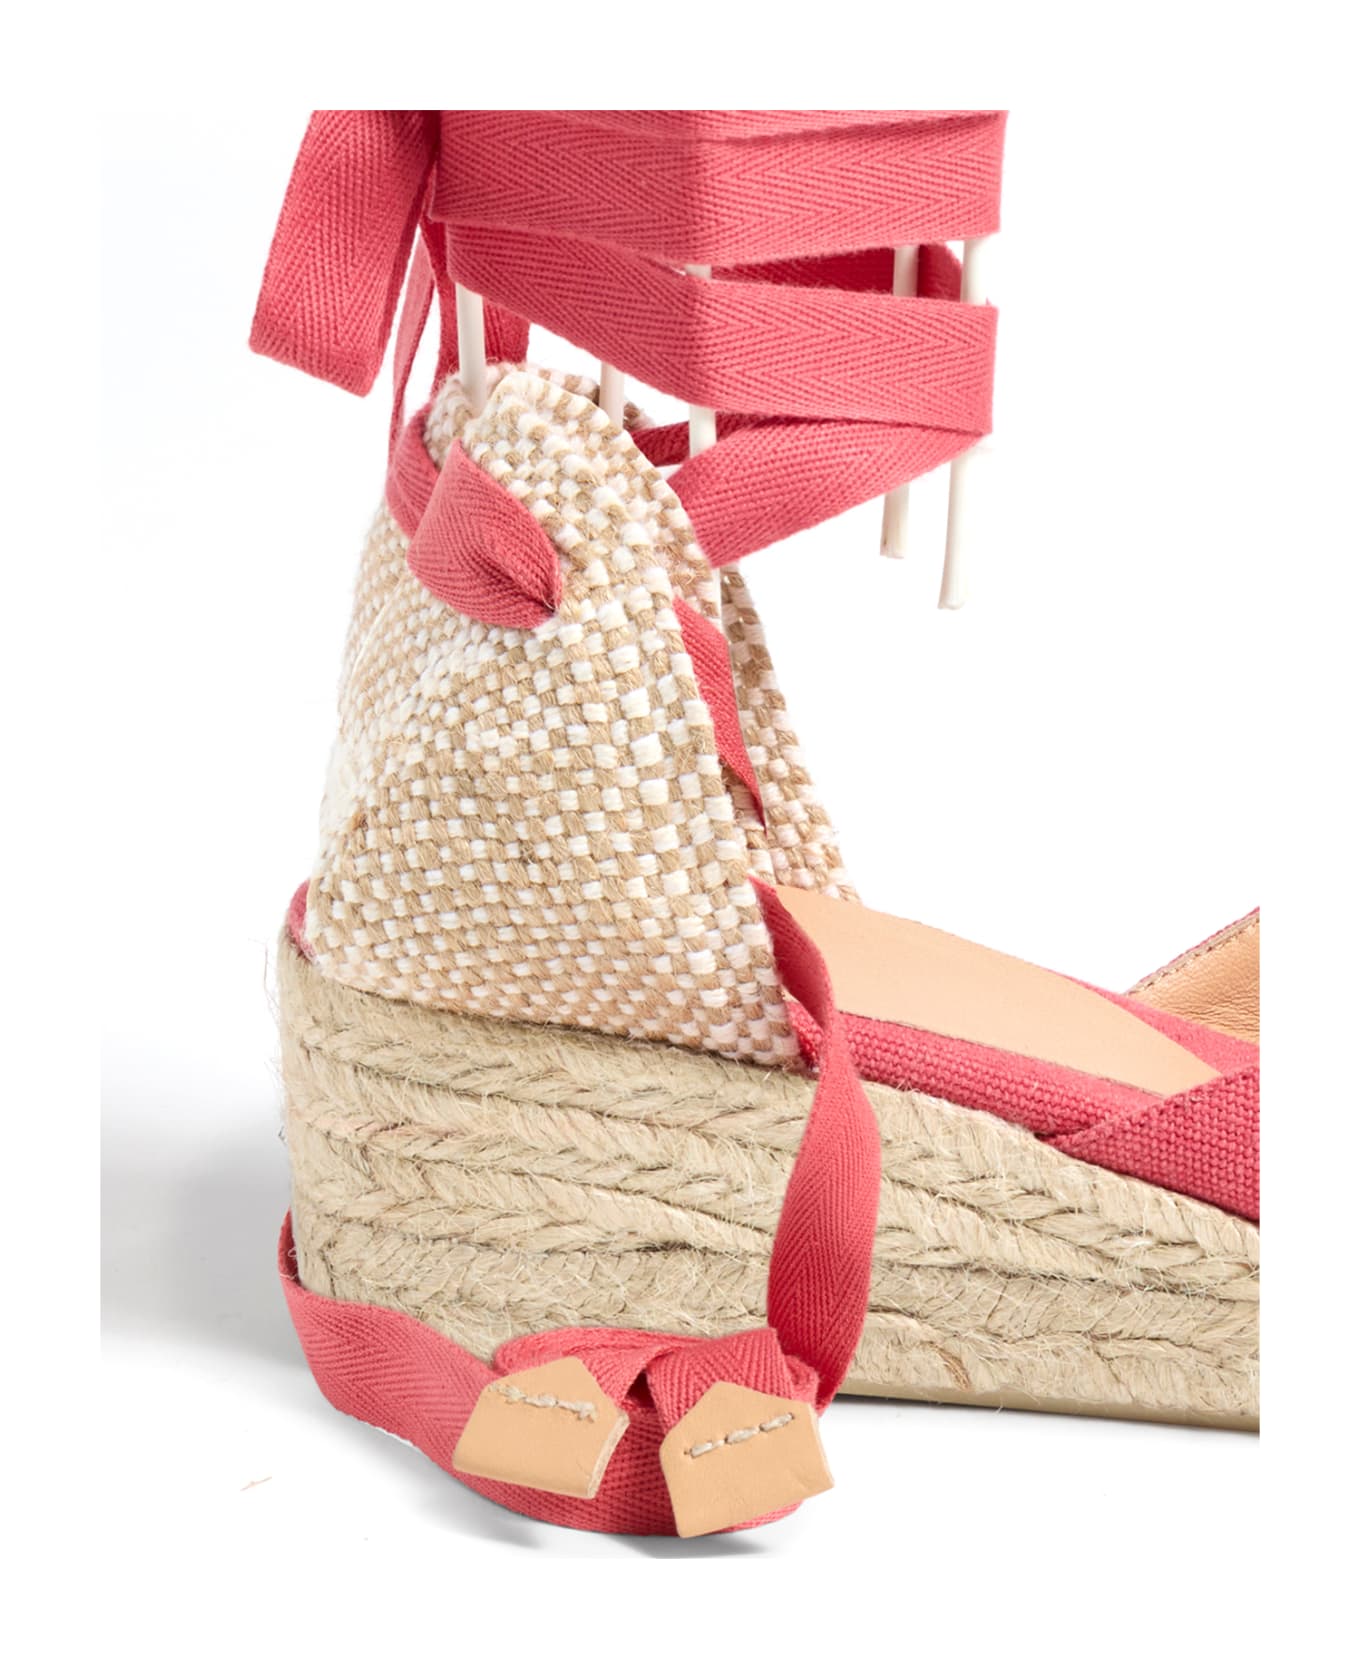 Castañer Espadrilles Carina Fuxia With Laces At The Ankle - RADIANT